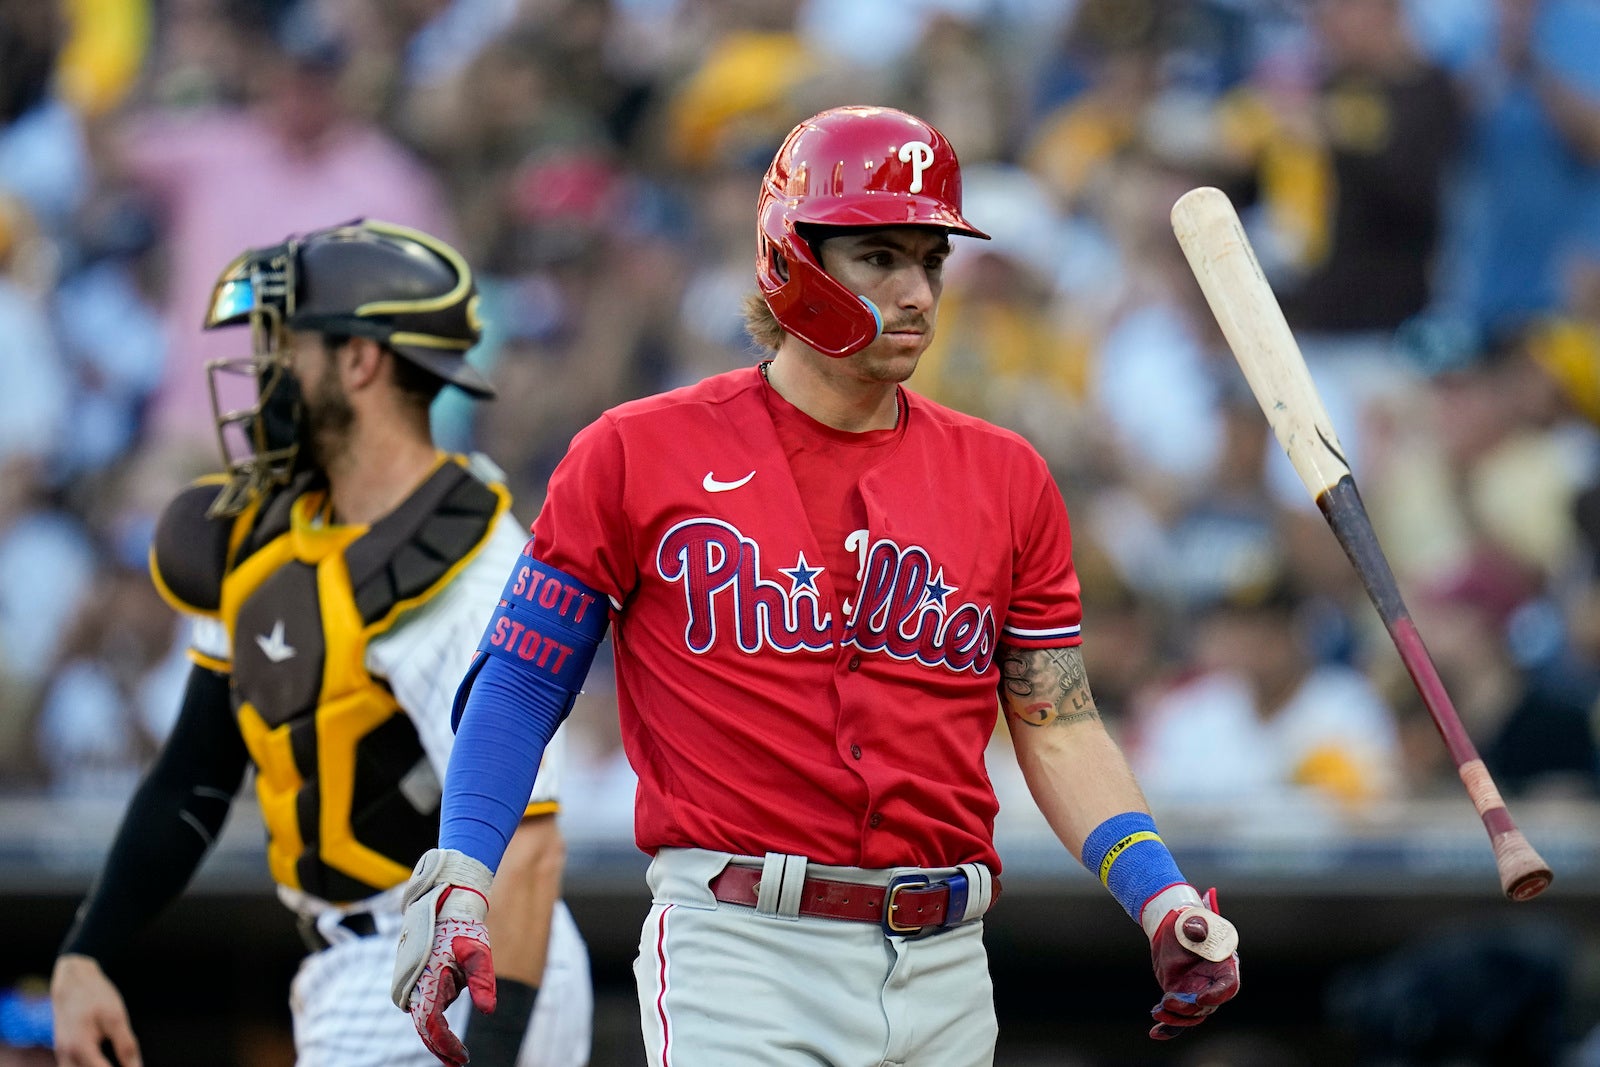 Phillies lose to Padres 8-5, NLCS tied 1-1